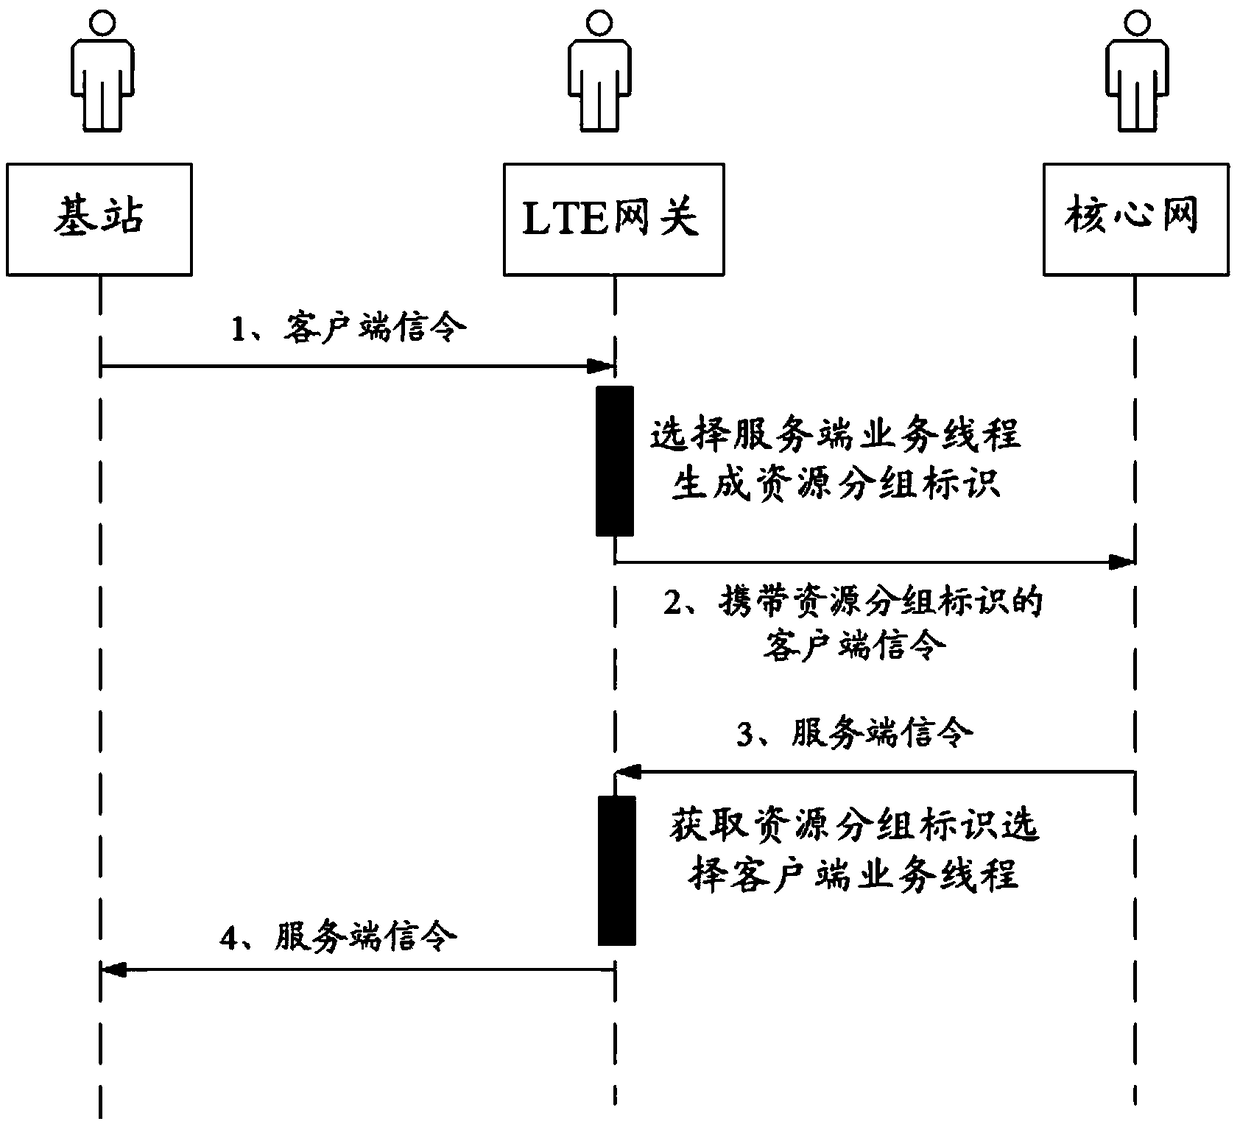 Resource distribution and management method and equipment